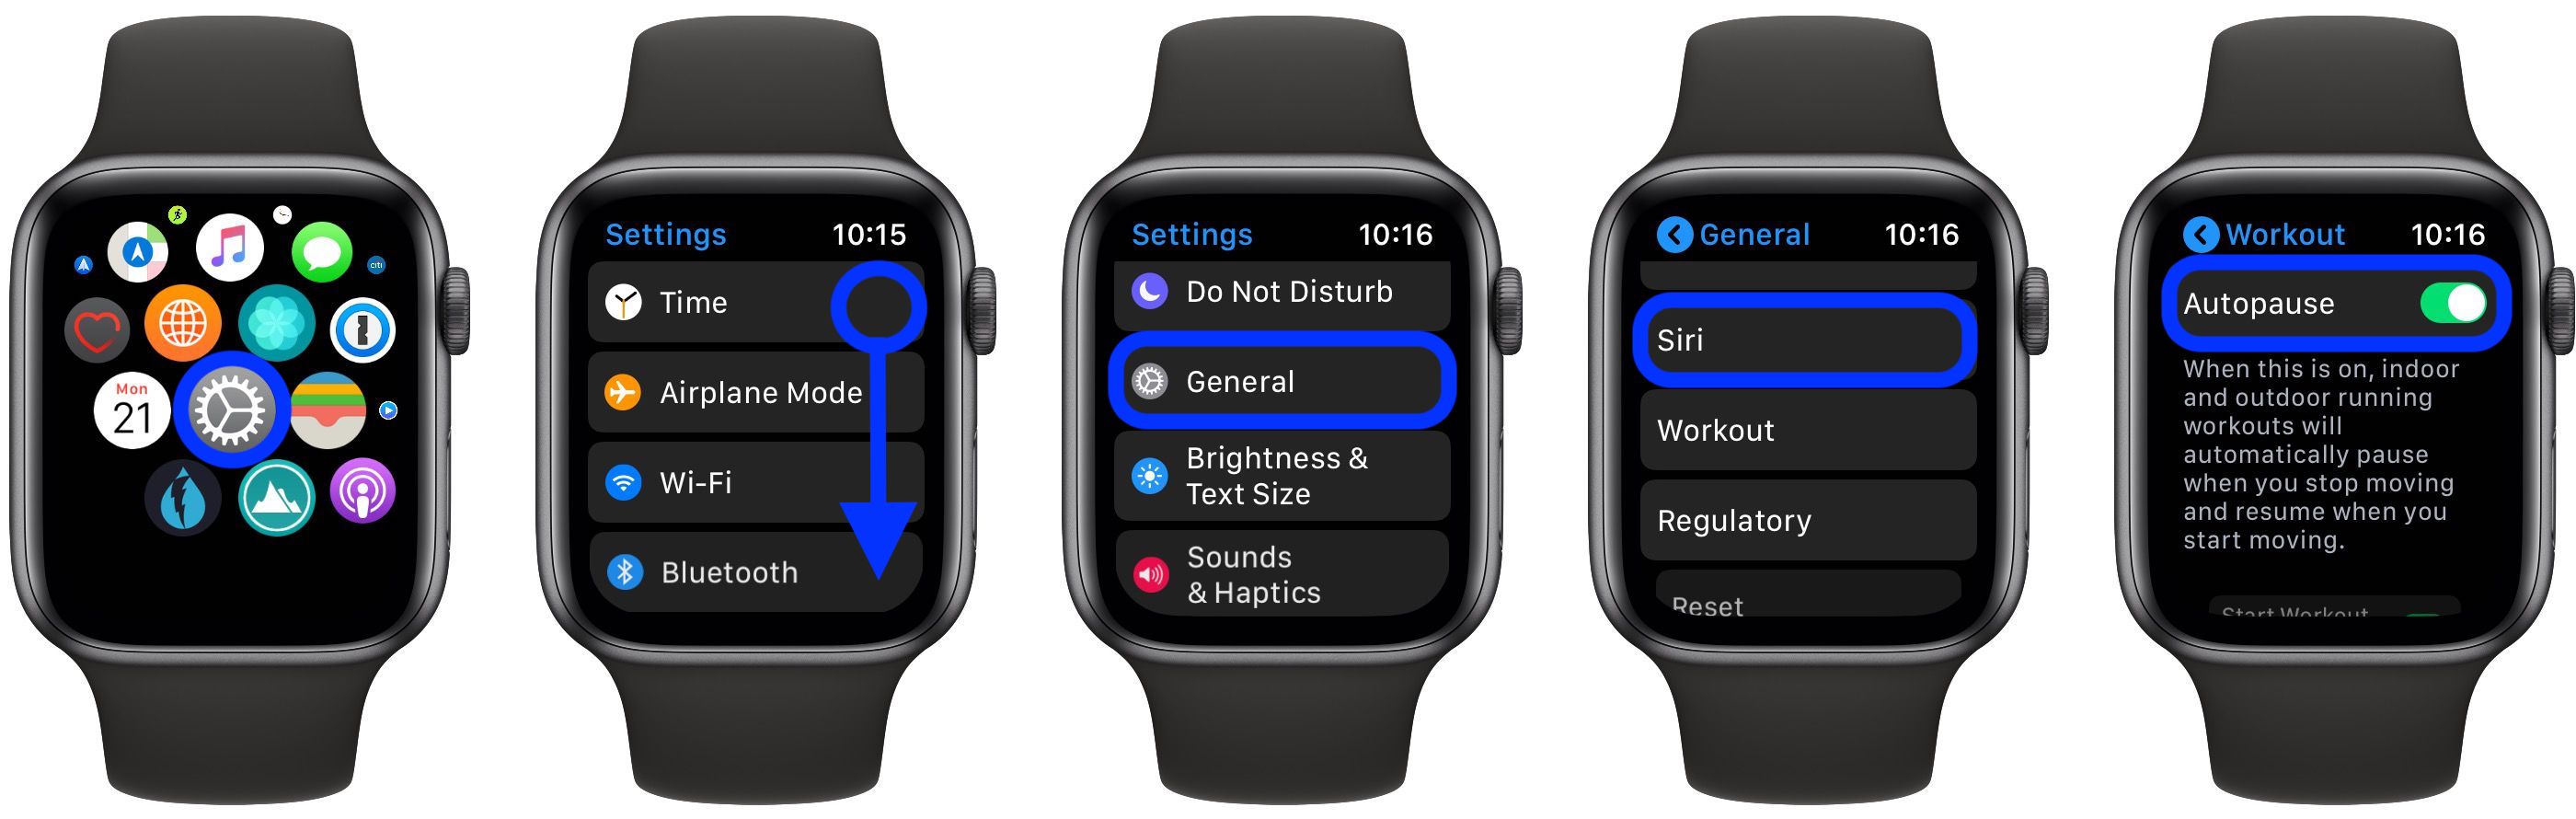 Auto Pause Apple Watch workouts